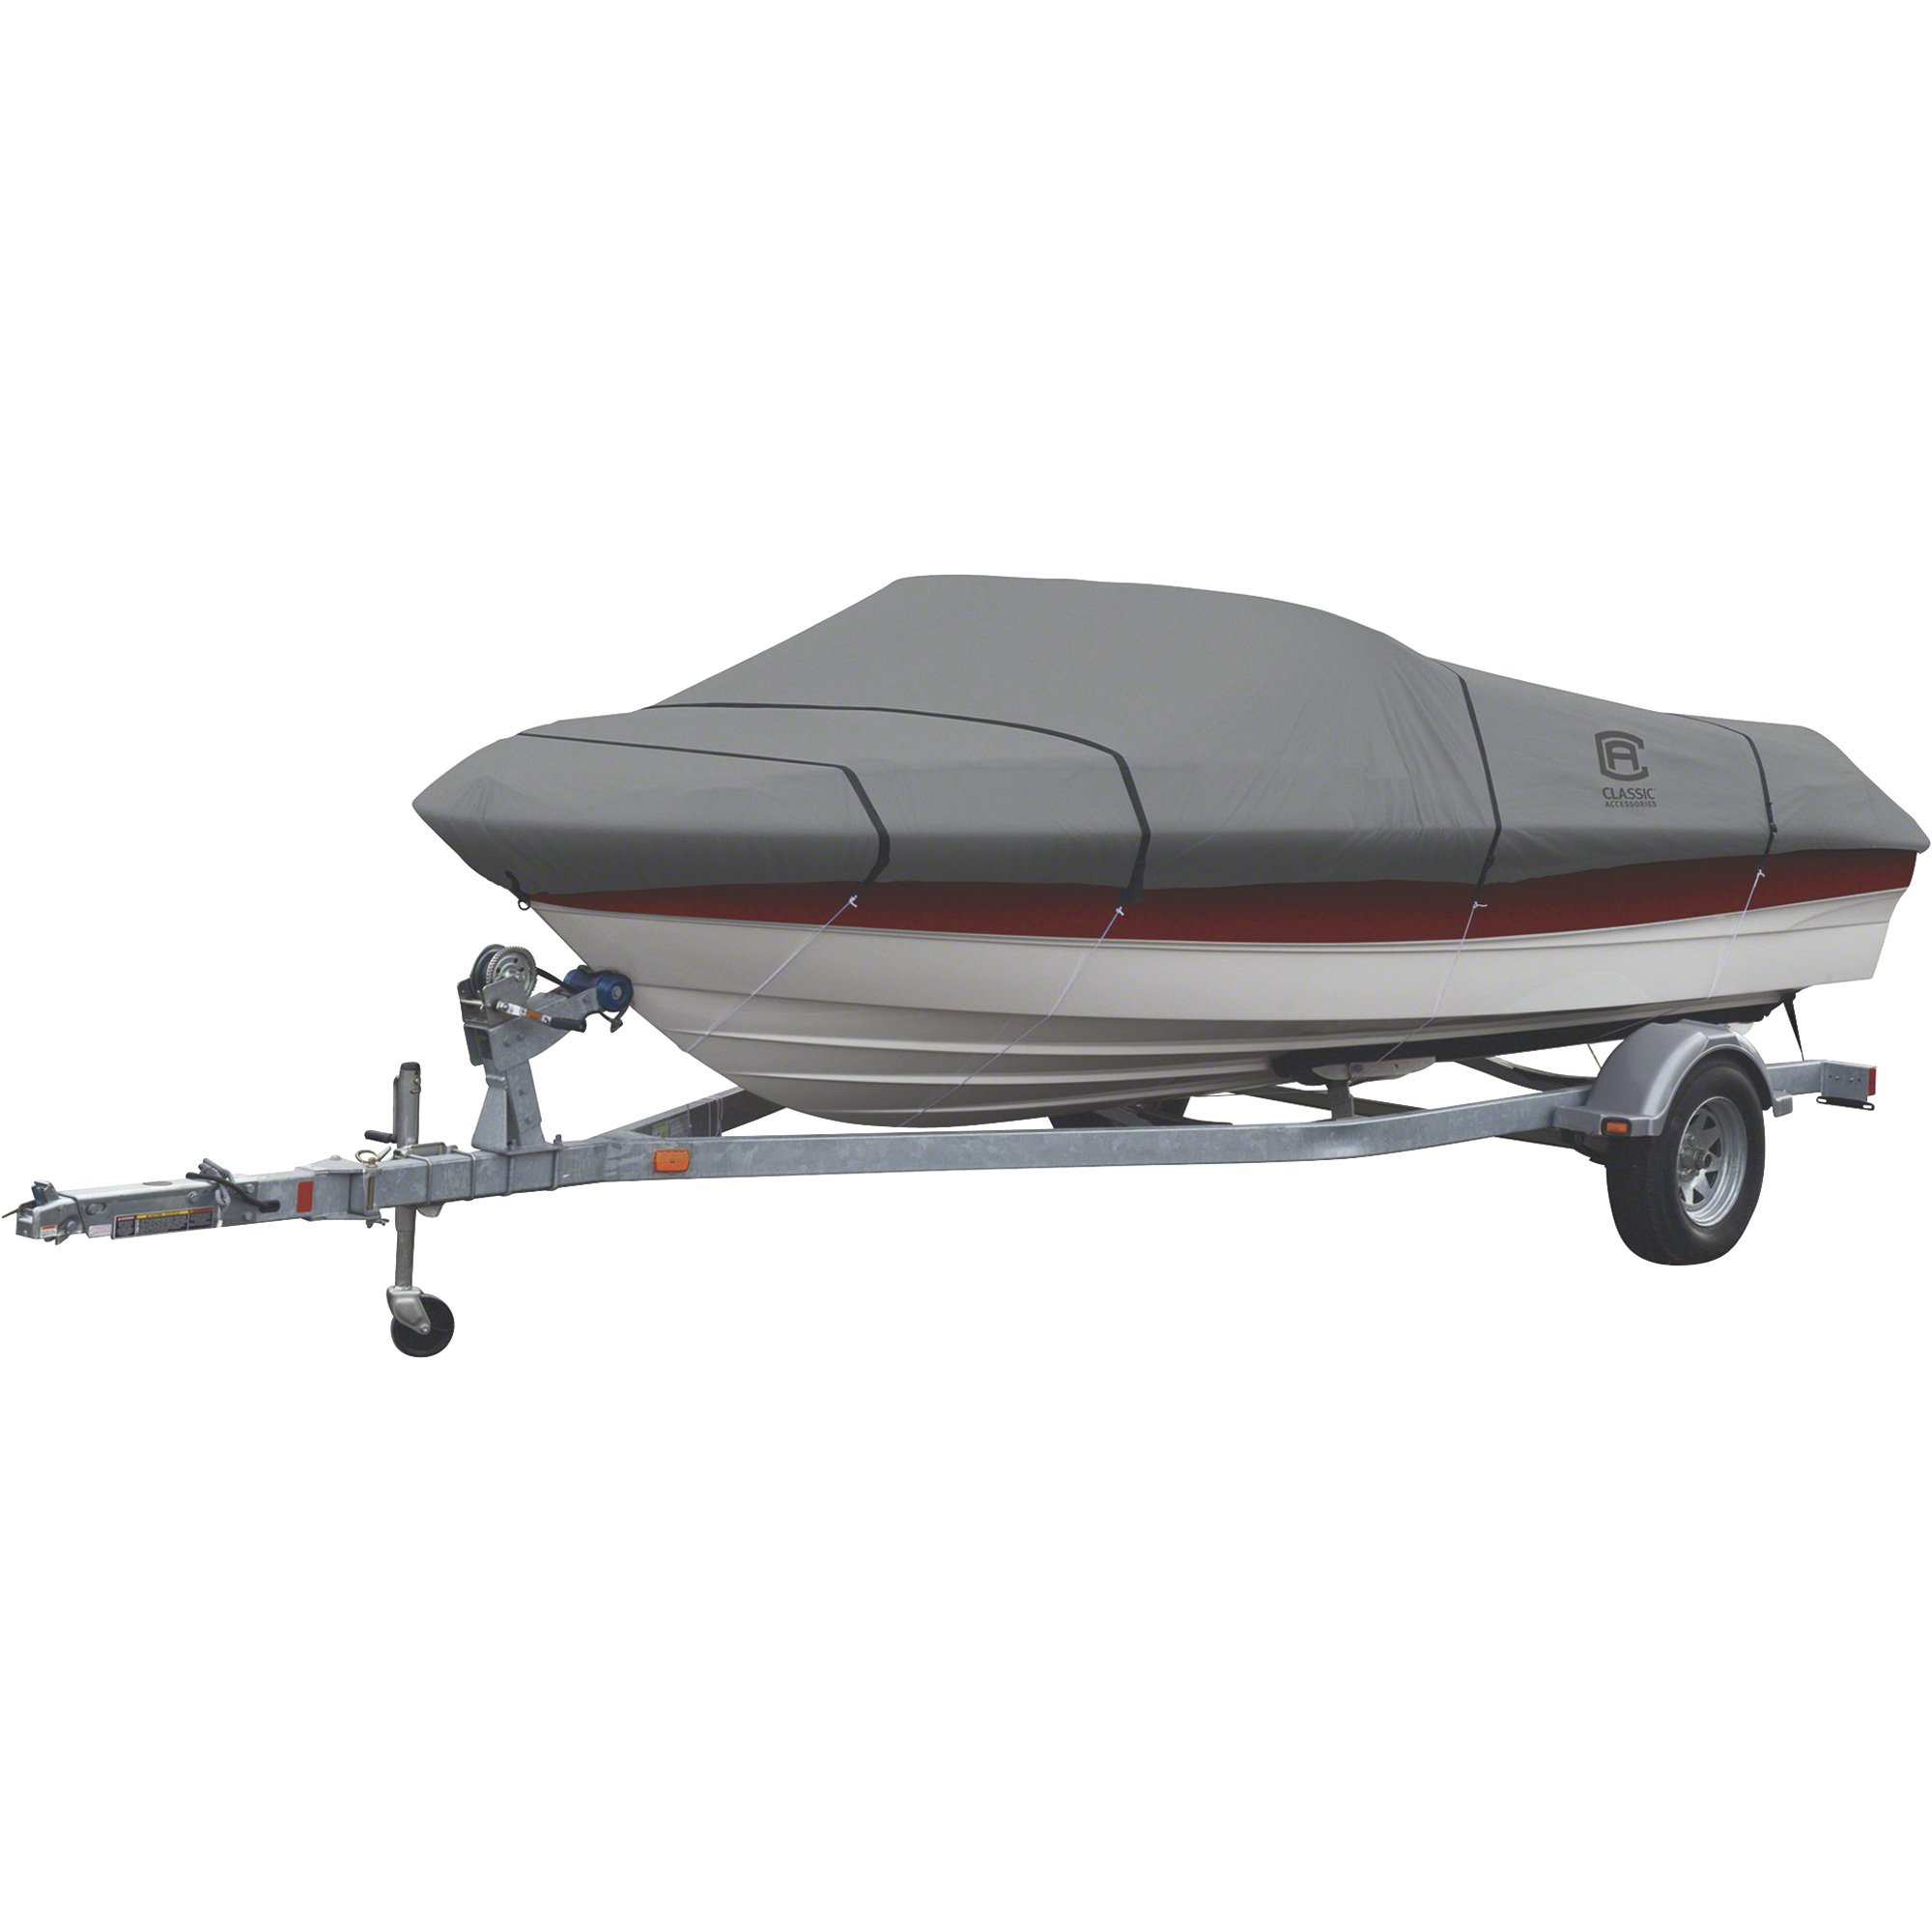 Classic Accessories Lunex RS-1 Trailerable Boat Cover — Fits 14ft.–16ft.  V-Hull and Tri-Hull Runabouts (Outboards and I/O) and Aluminum Bass Boats  (Beam Width up to 90in.), Gray, Model# 20-141-091001-00